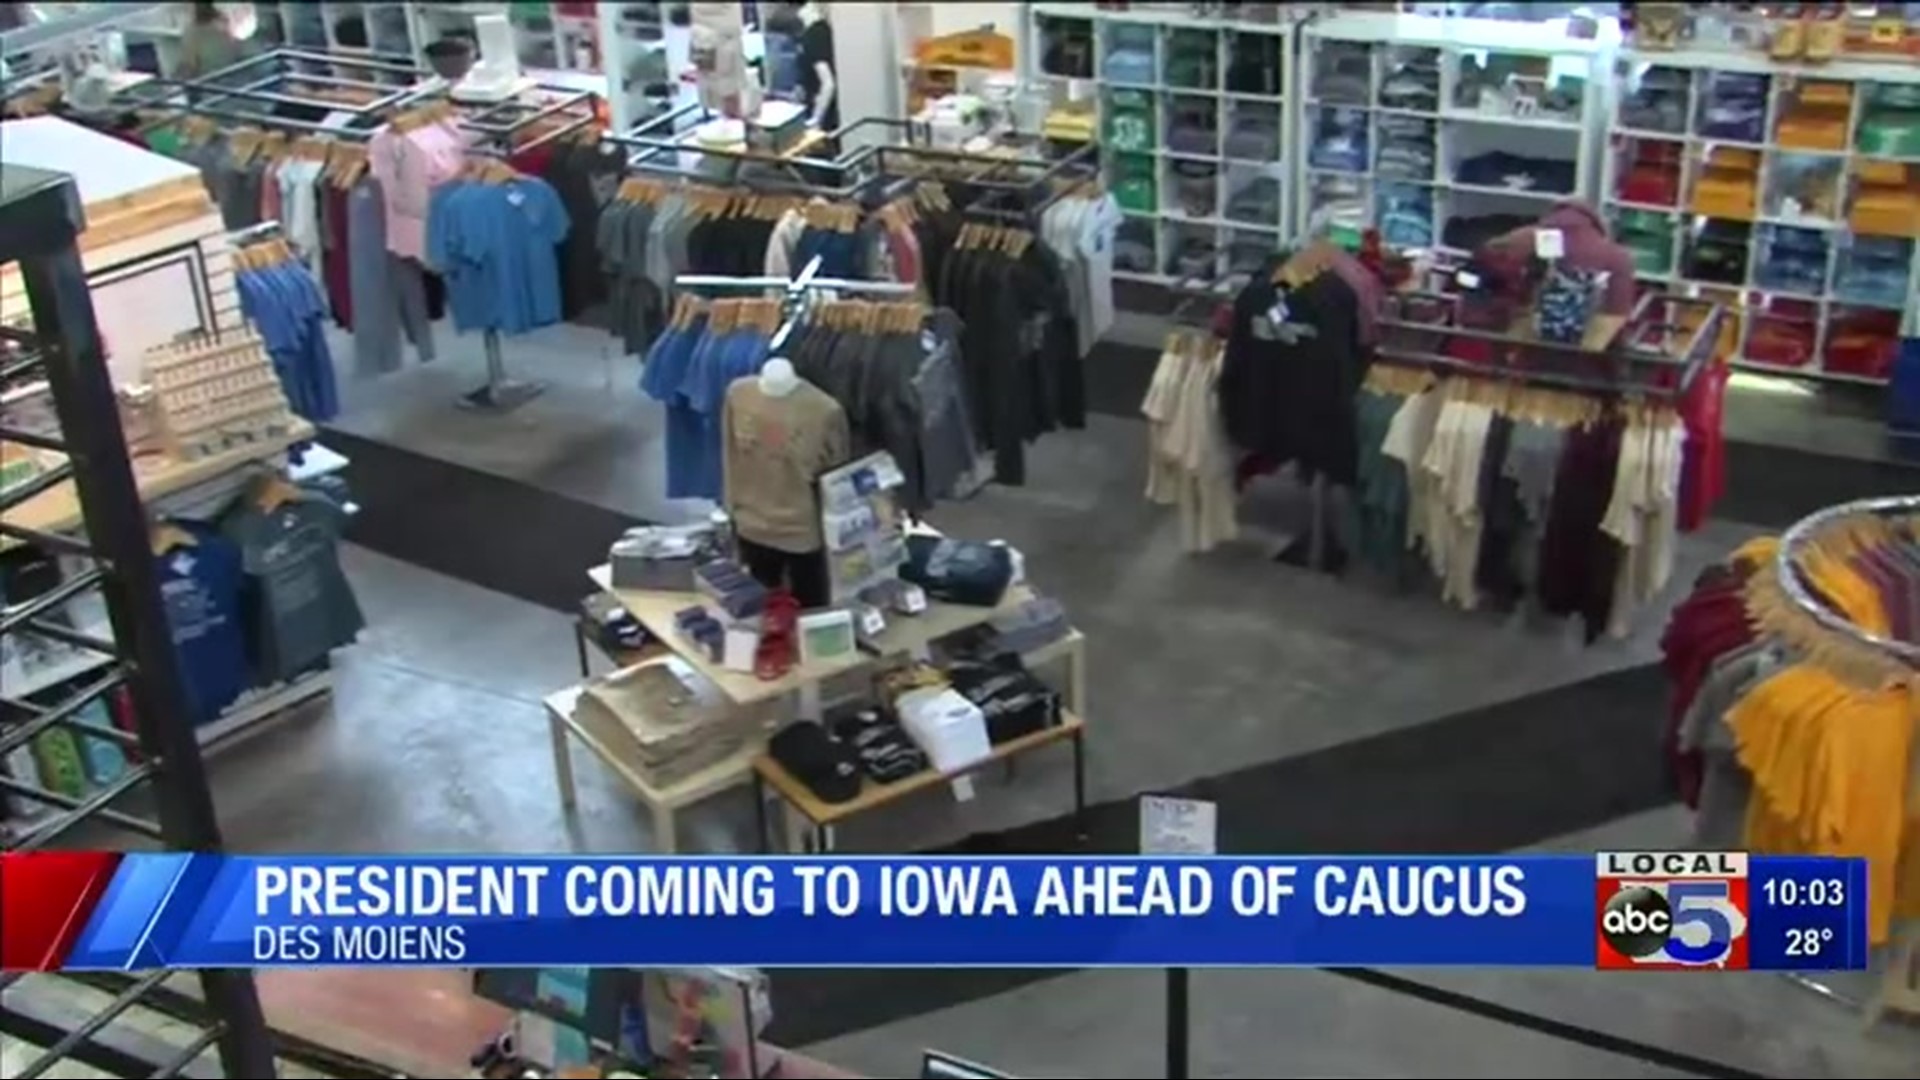 Des Moines businesses feel impact of caucus season and President Trump visit